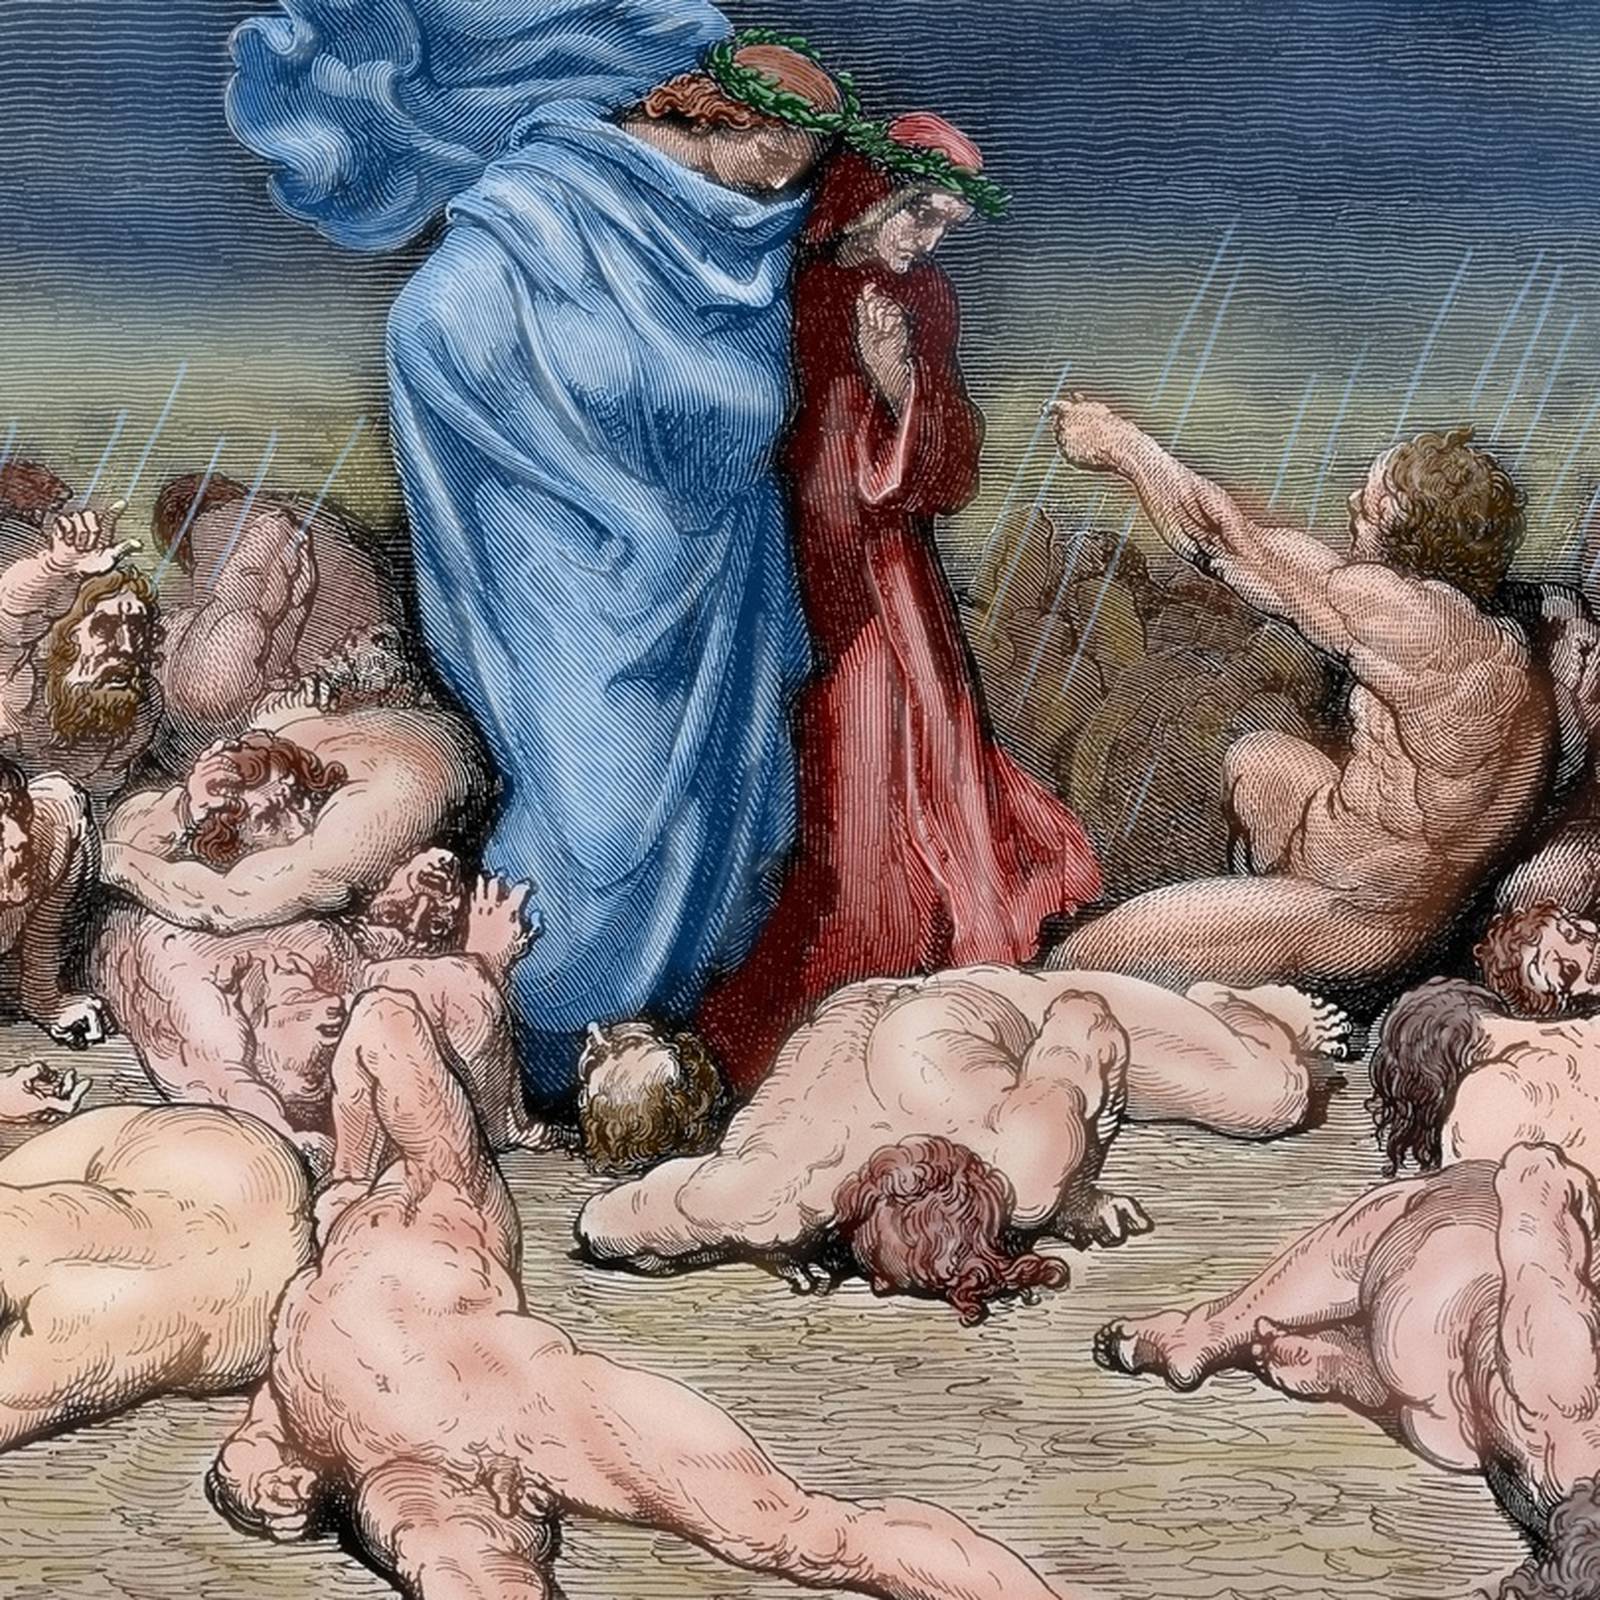 Why Dante's 'Inferno' is important and still read by Irish writers